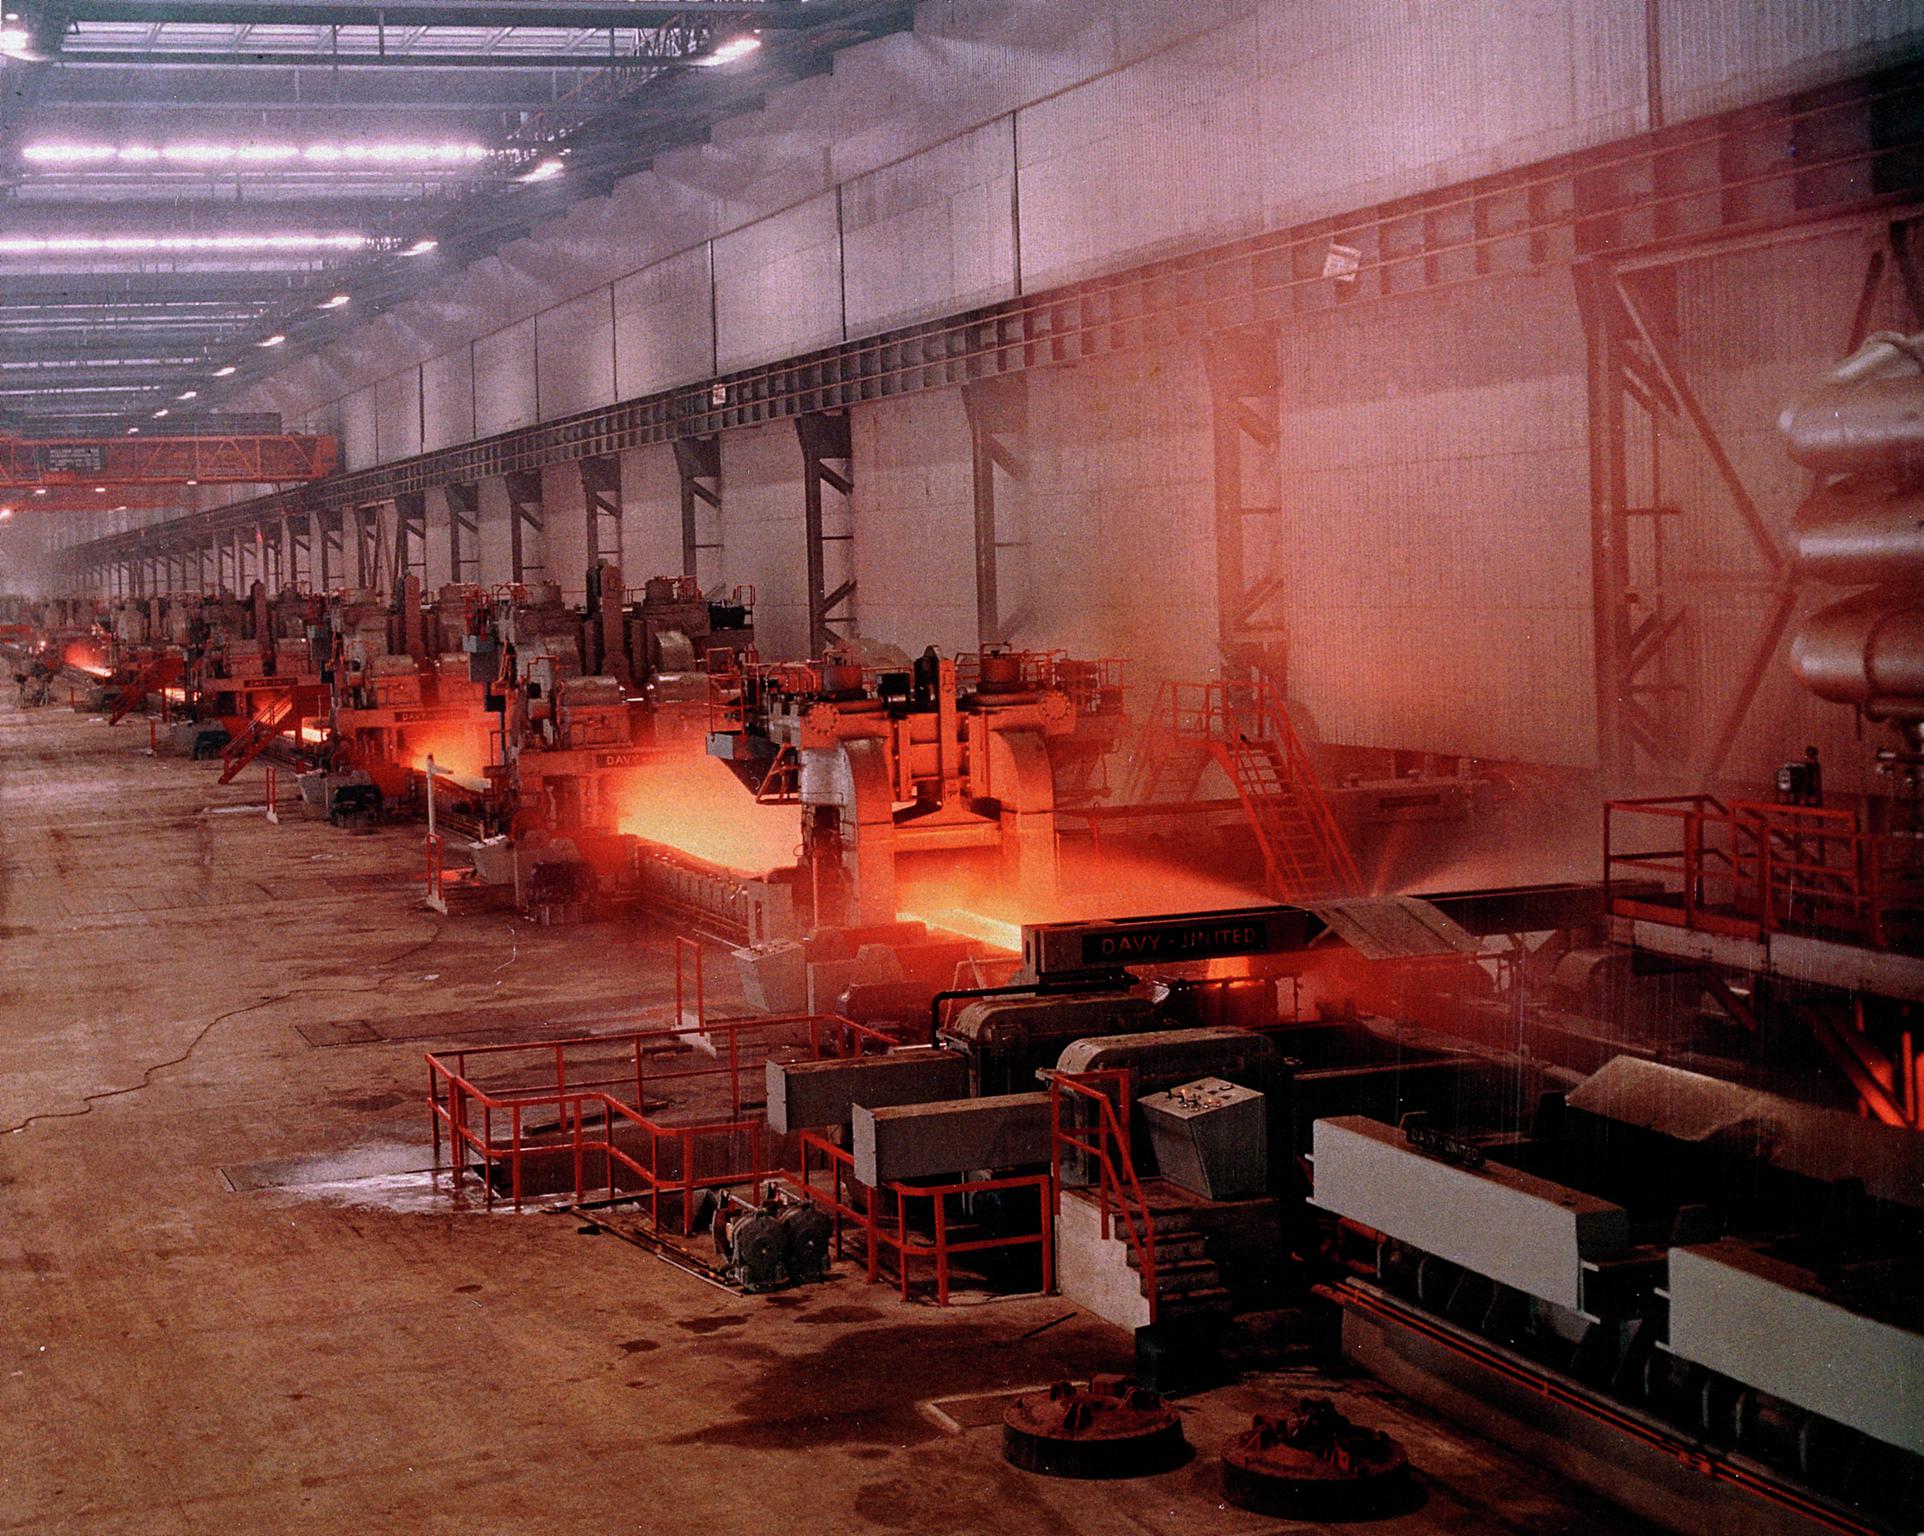 Ebbw Vale steelworks, photograph